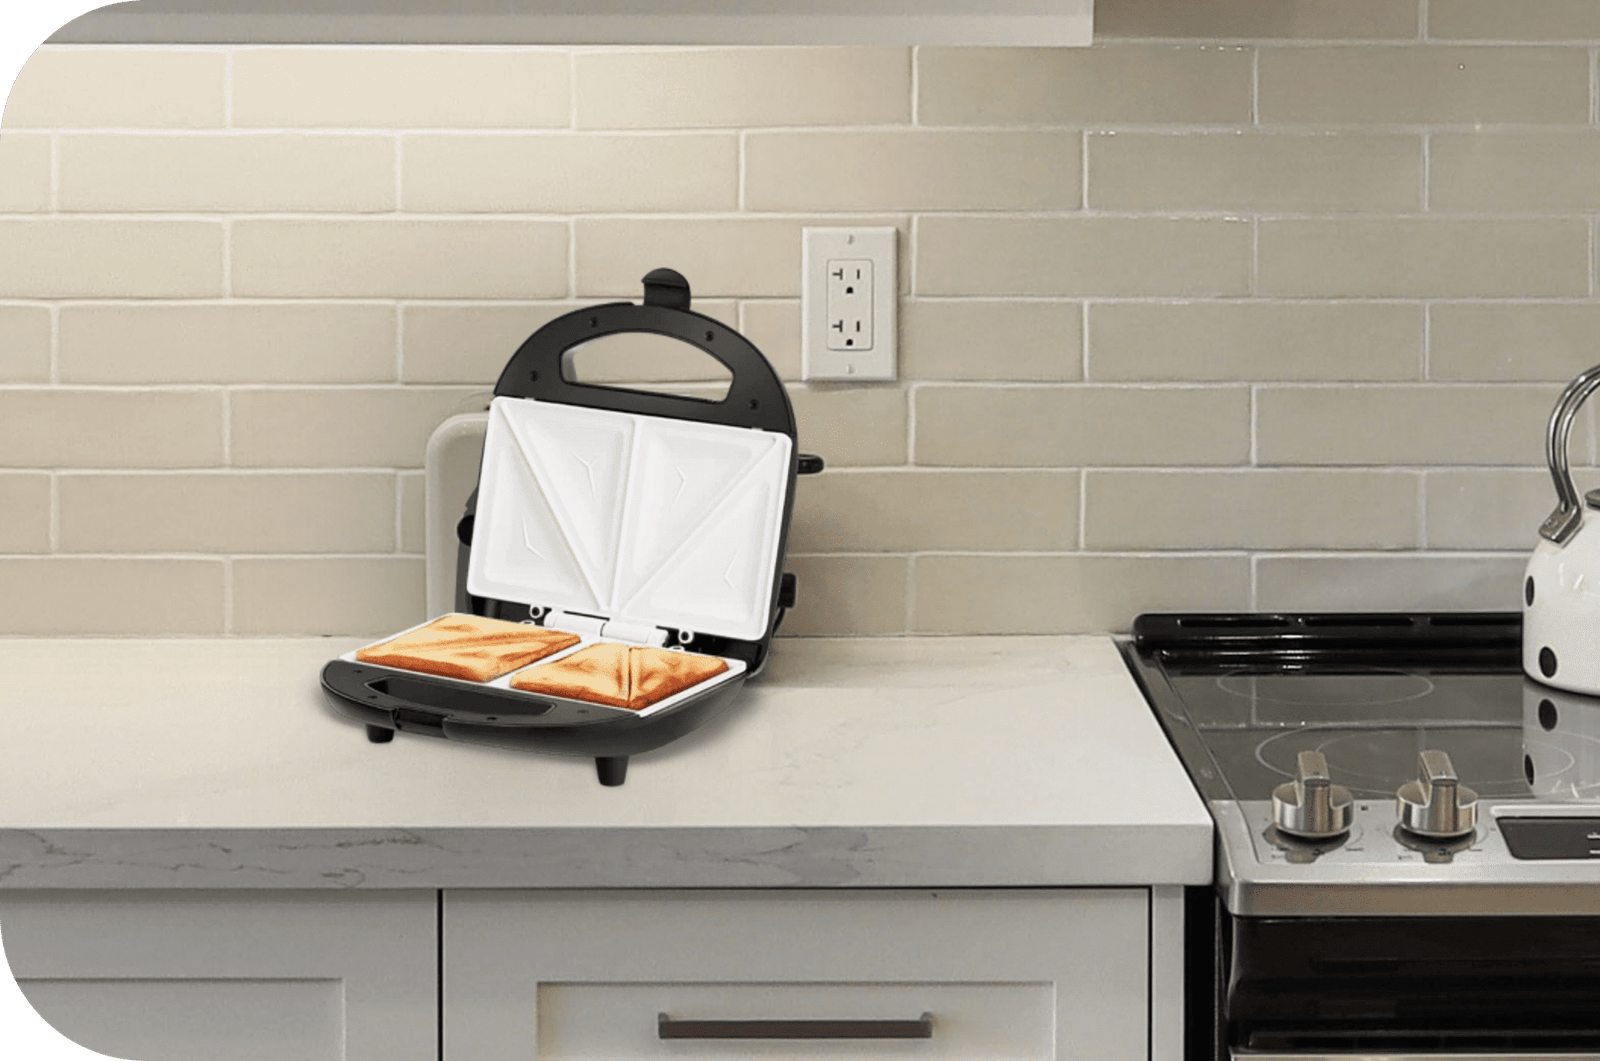 5 Toaster Options To Make Perfectly Grilled Sandwiches